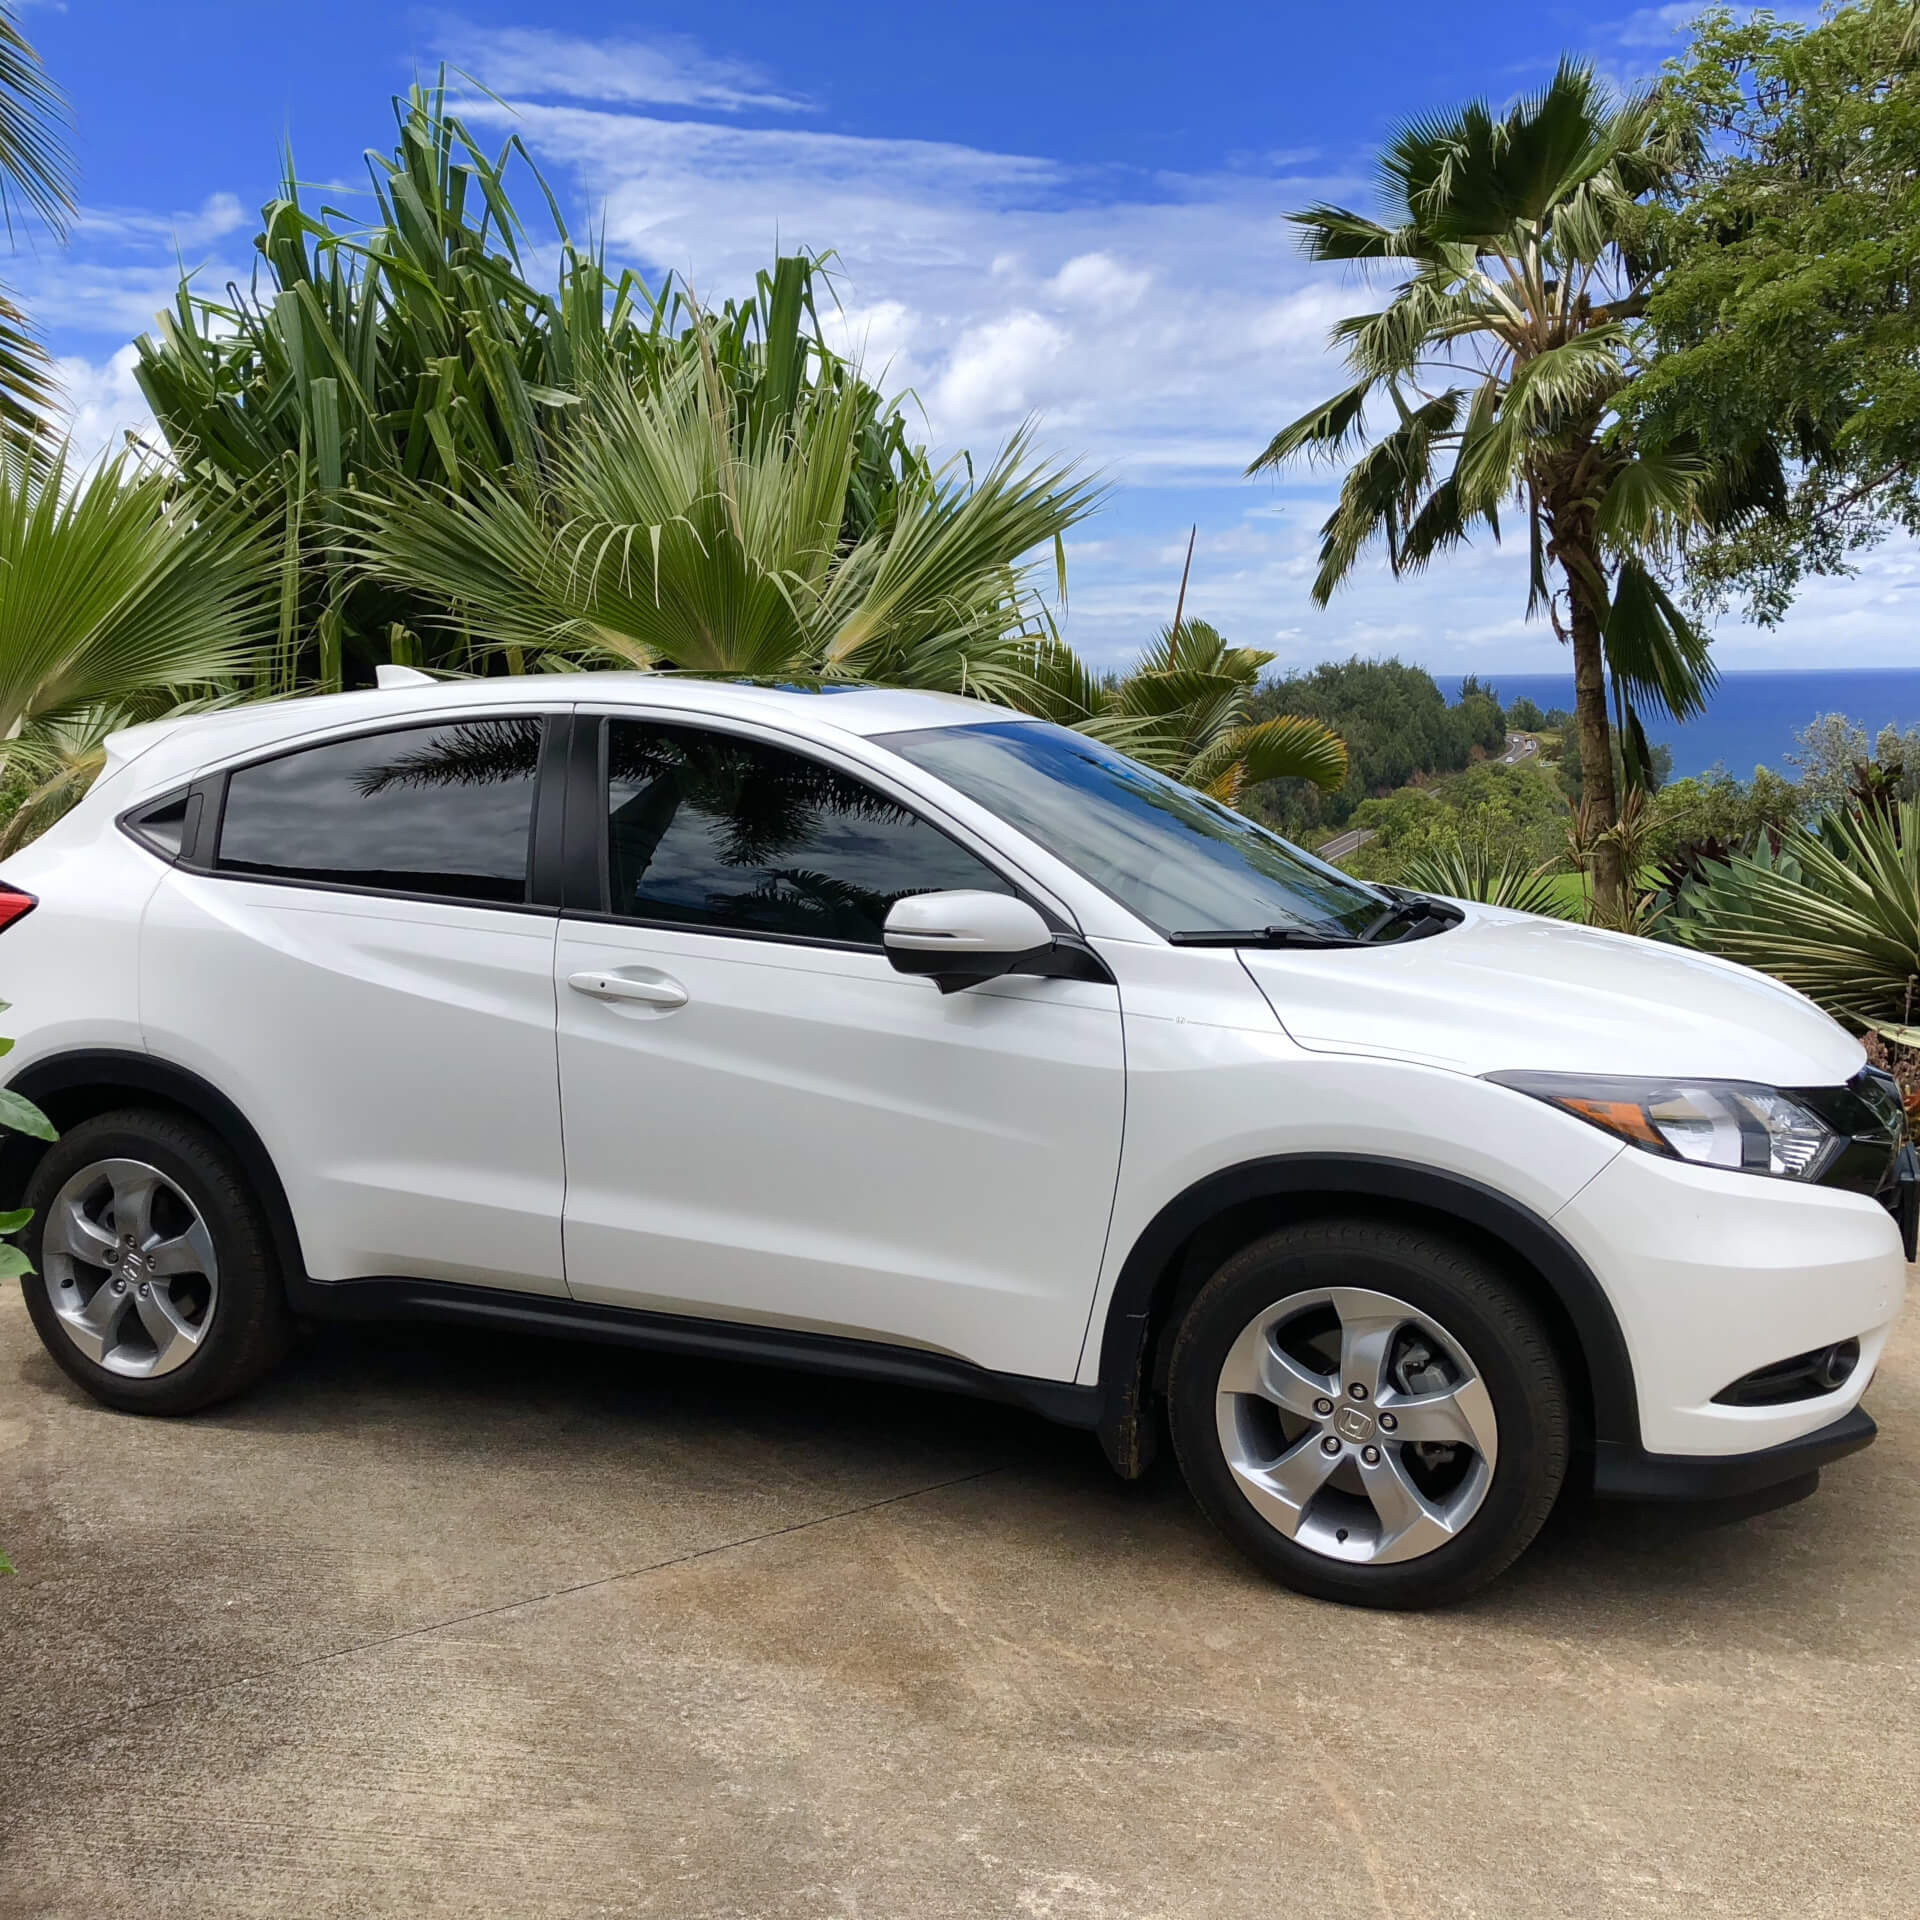 Direct4x4 accessories for Honda HR-V vehicles with a photo of a white Honda HR-V in a tropical location with palm trees